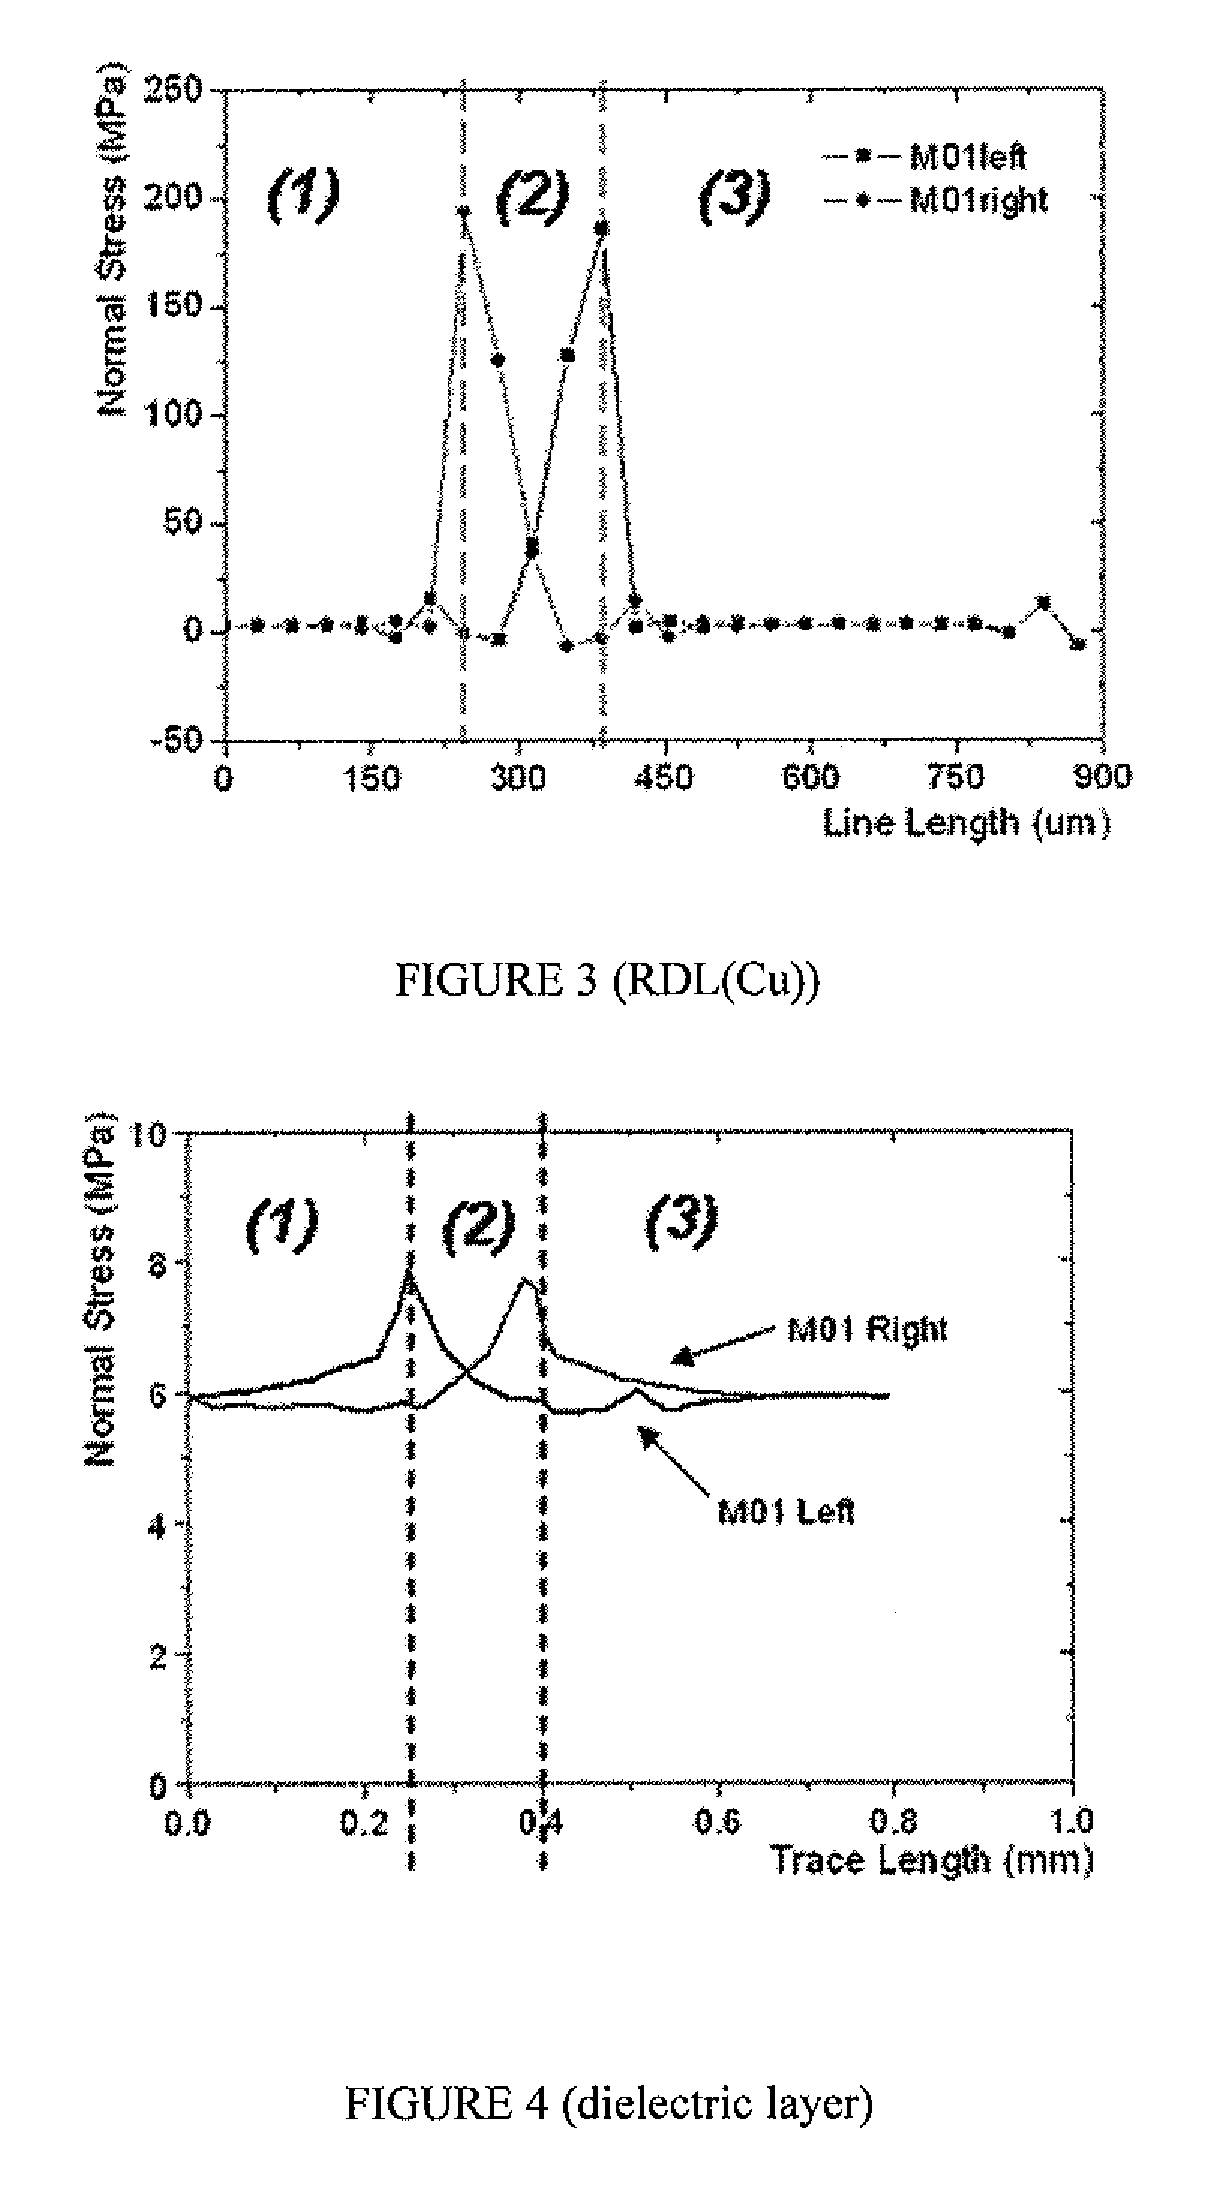 Structure of dielectric layers in built-up layers of wafer level package